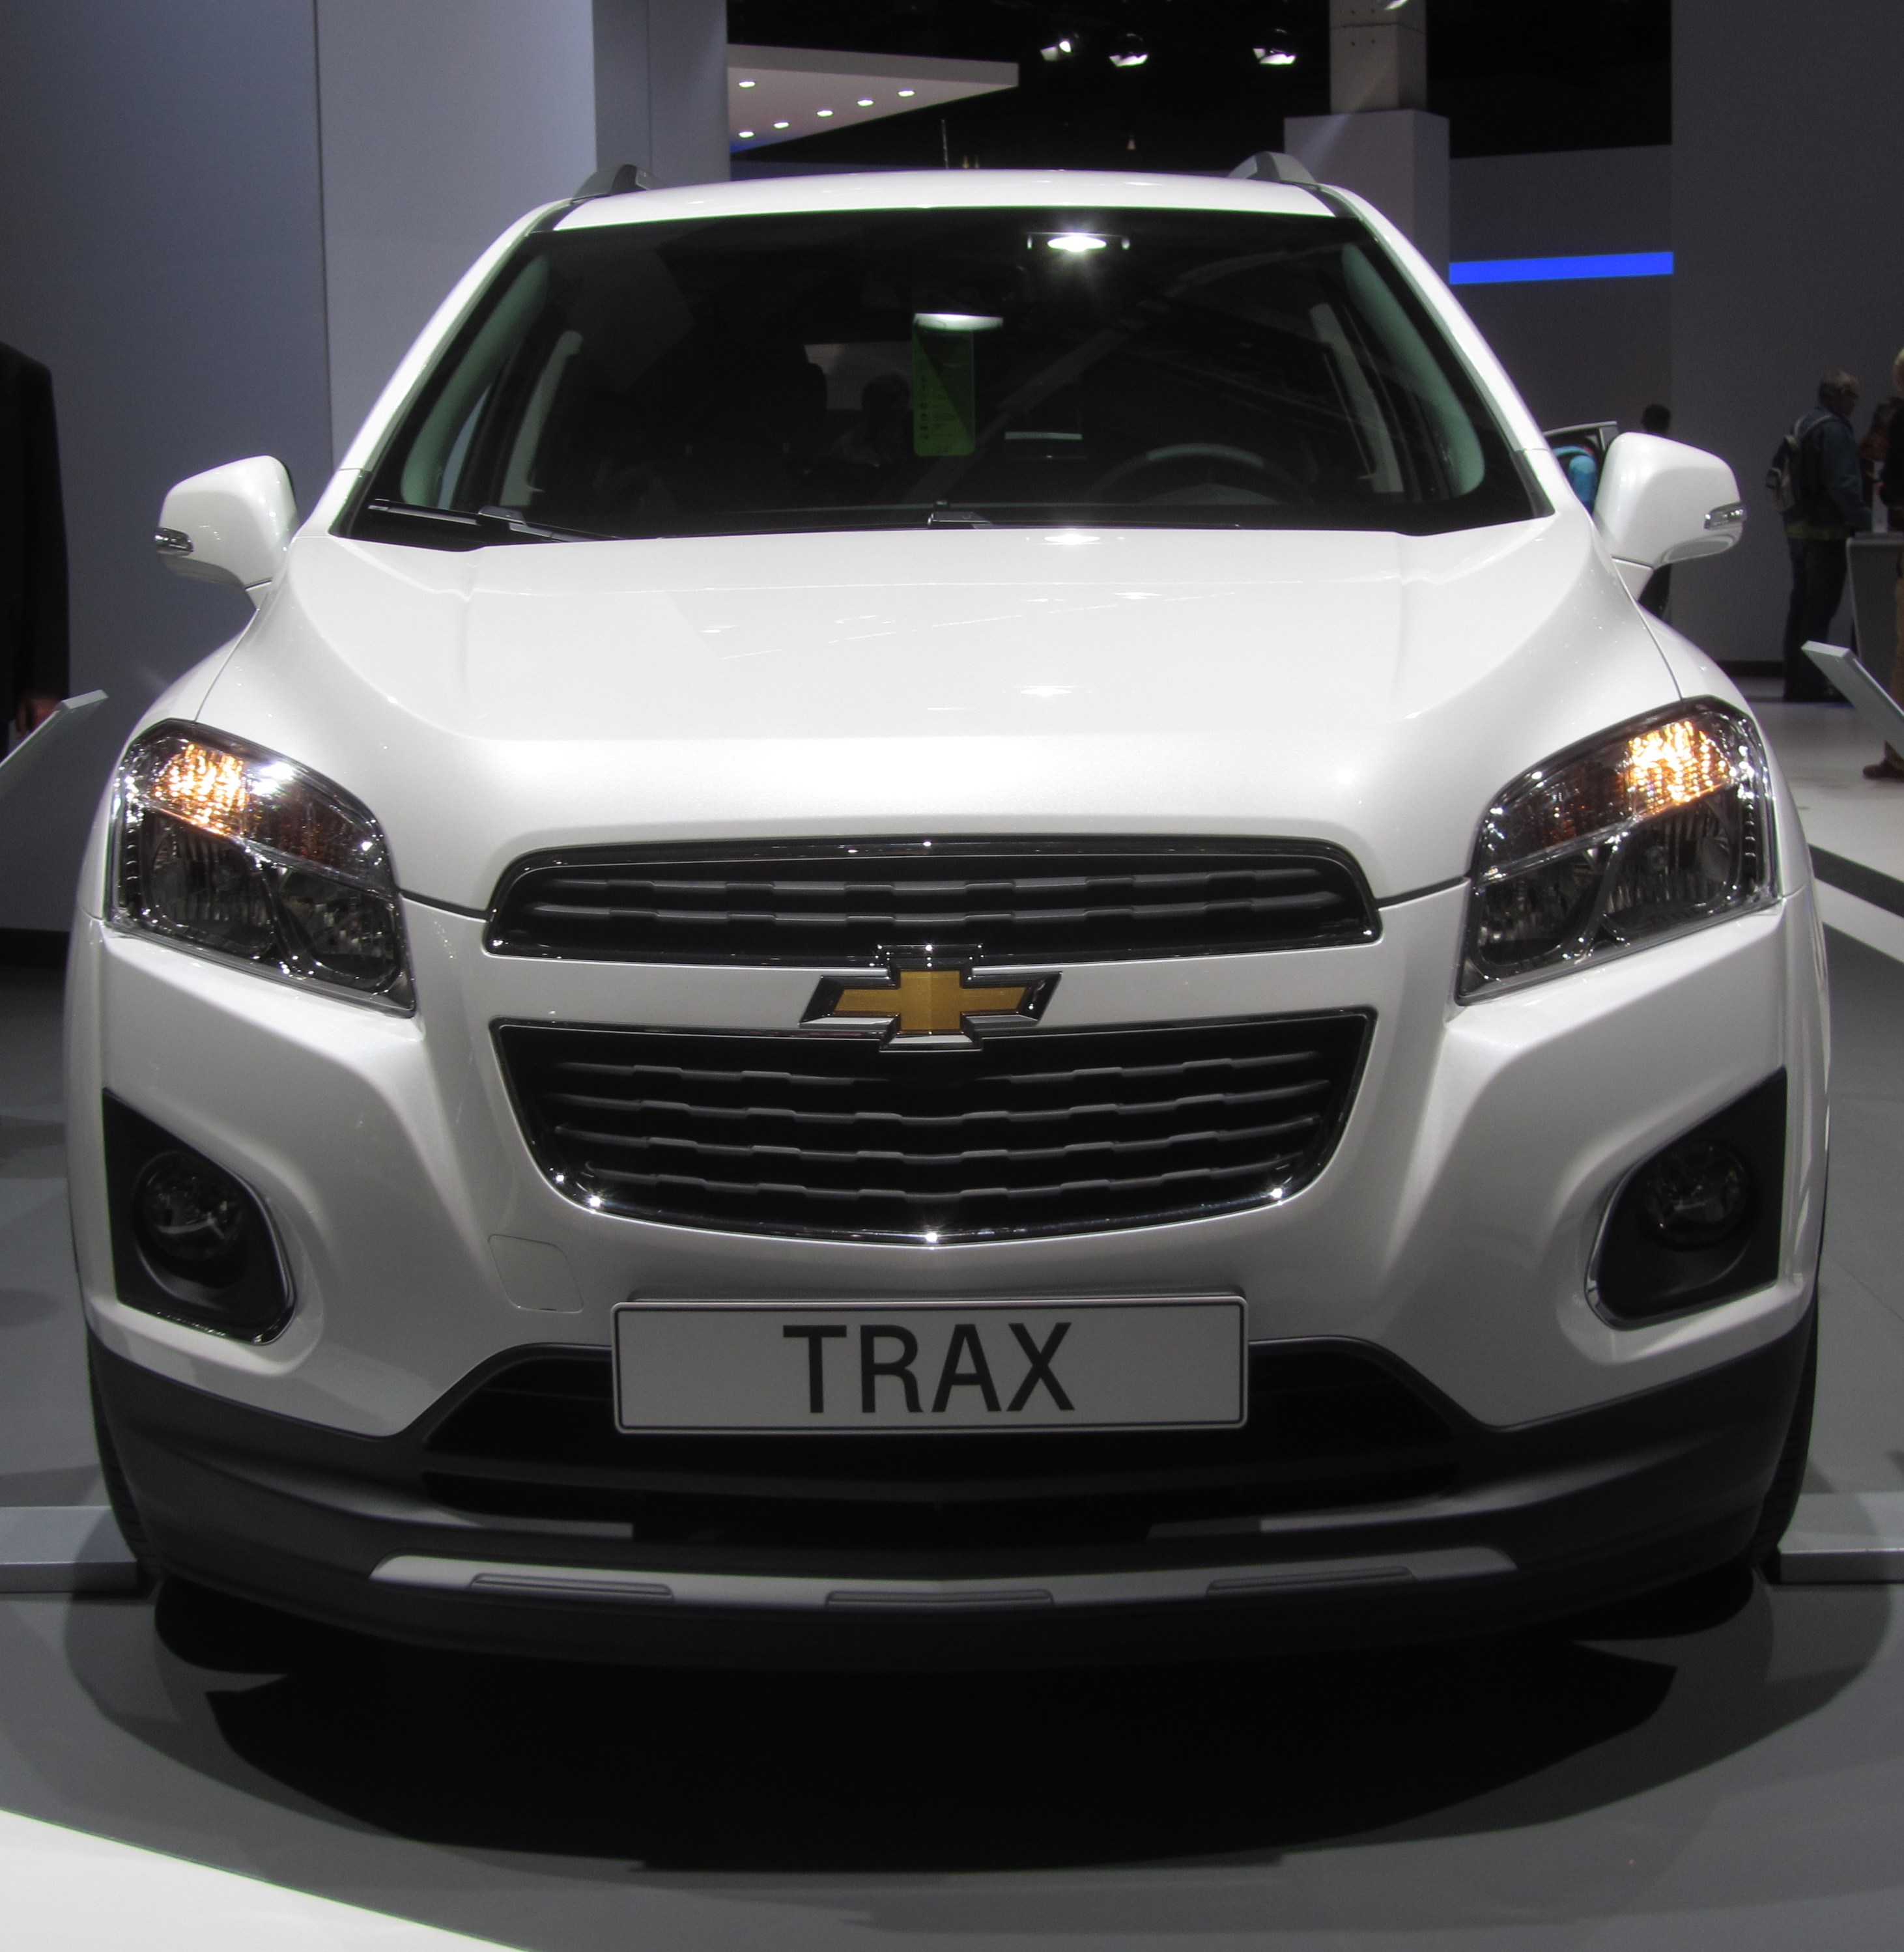 Chevrolet Trax (Tracker) best specifications